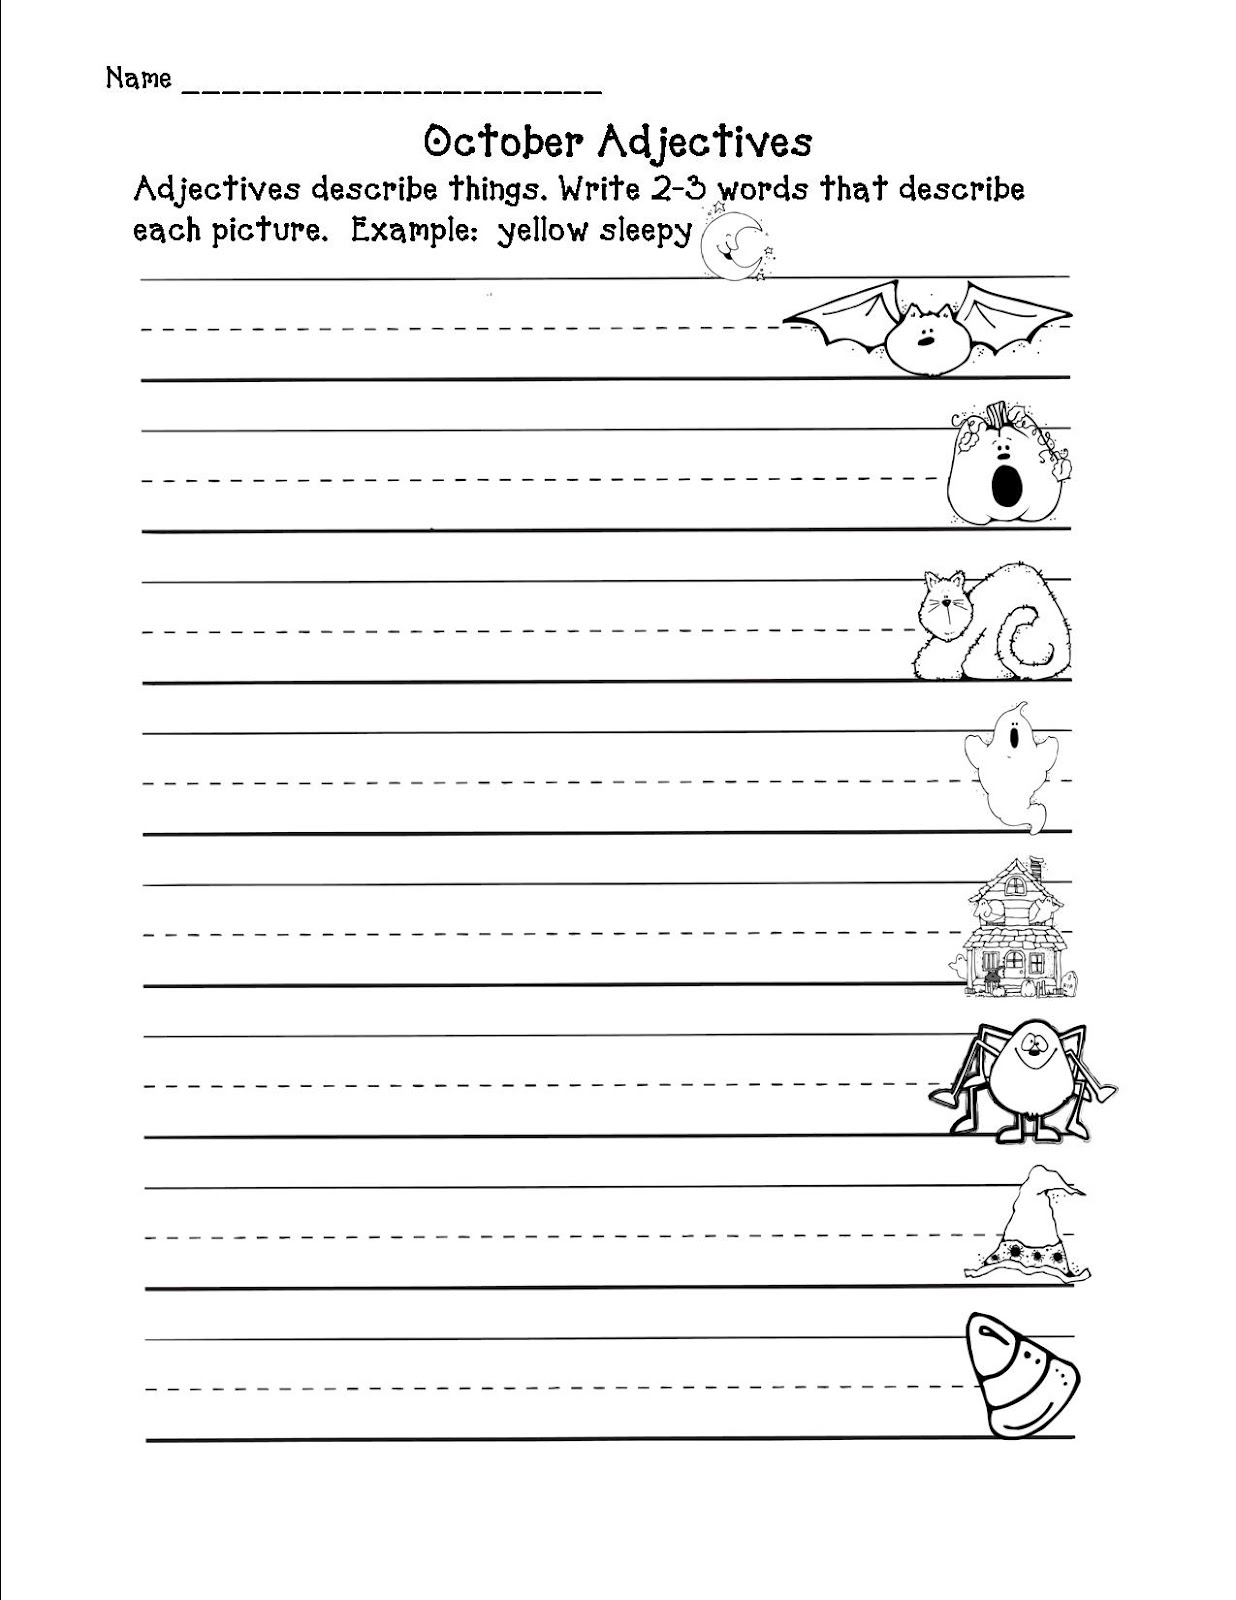 Clip Art To Share With You  There Are Two Worksheets In This Freebie